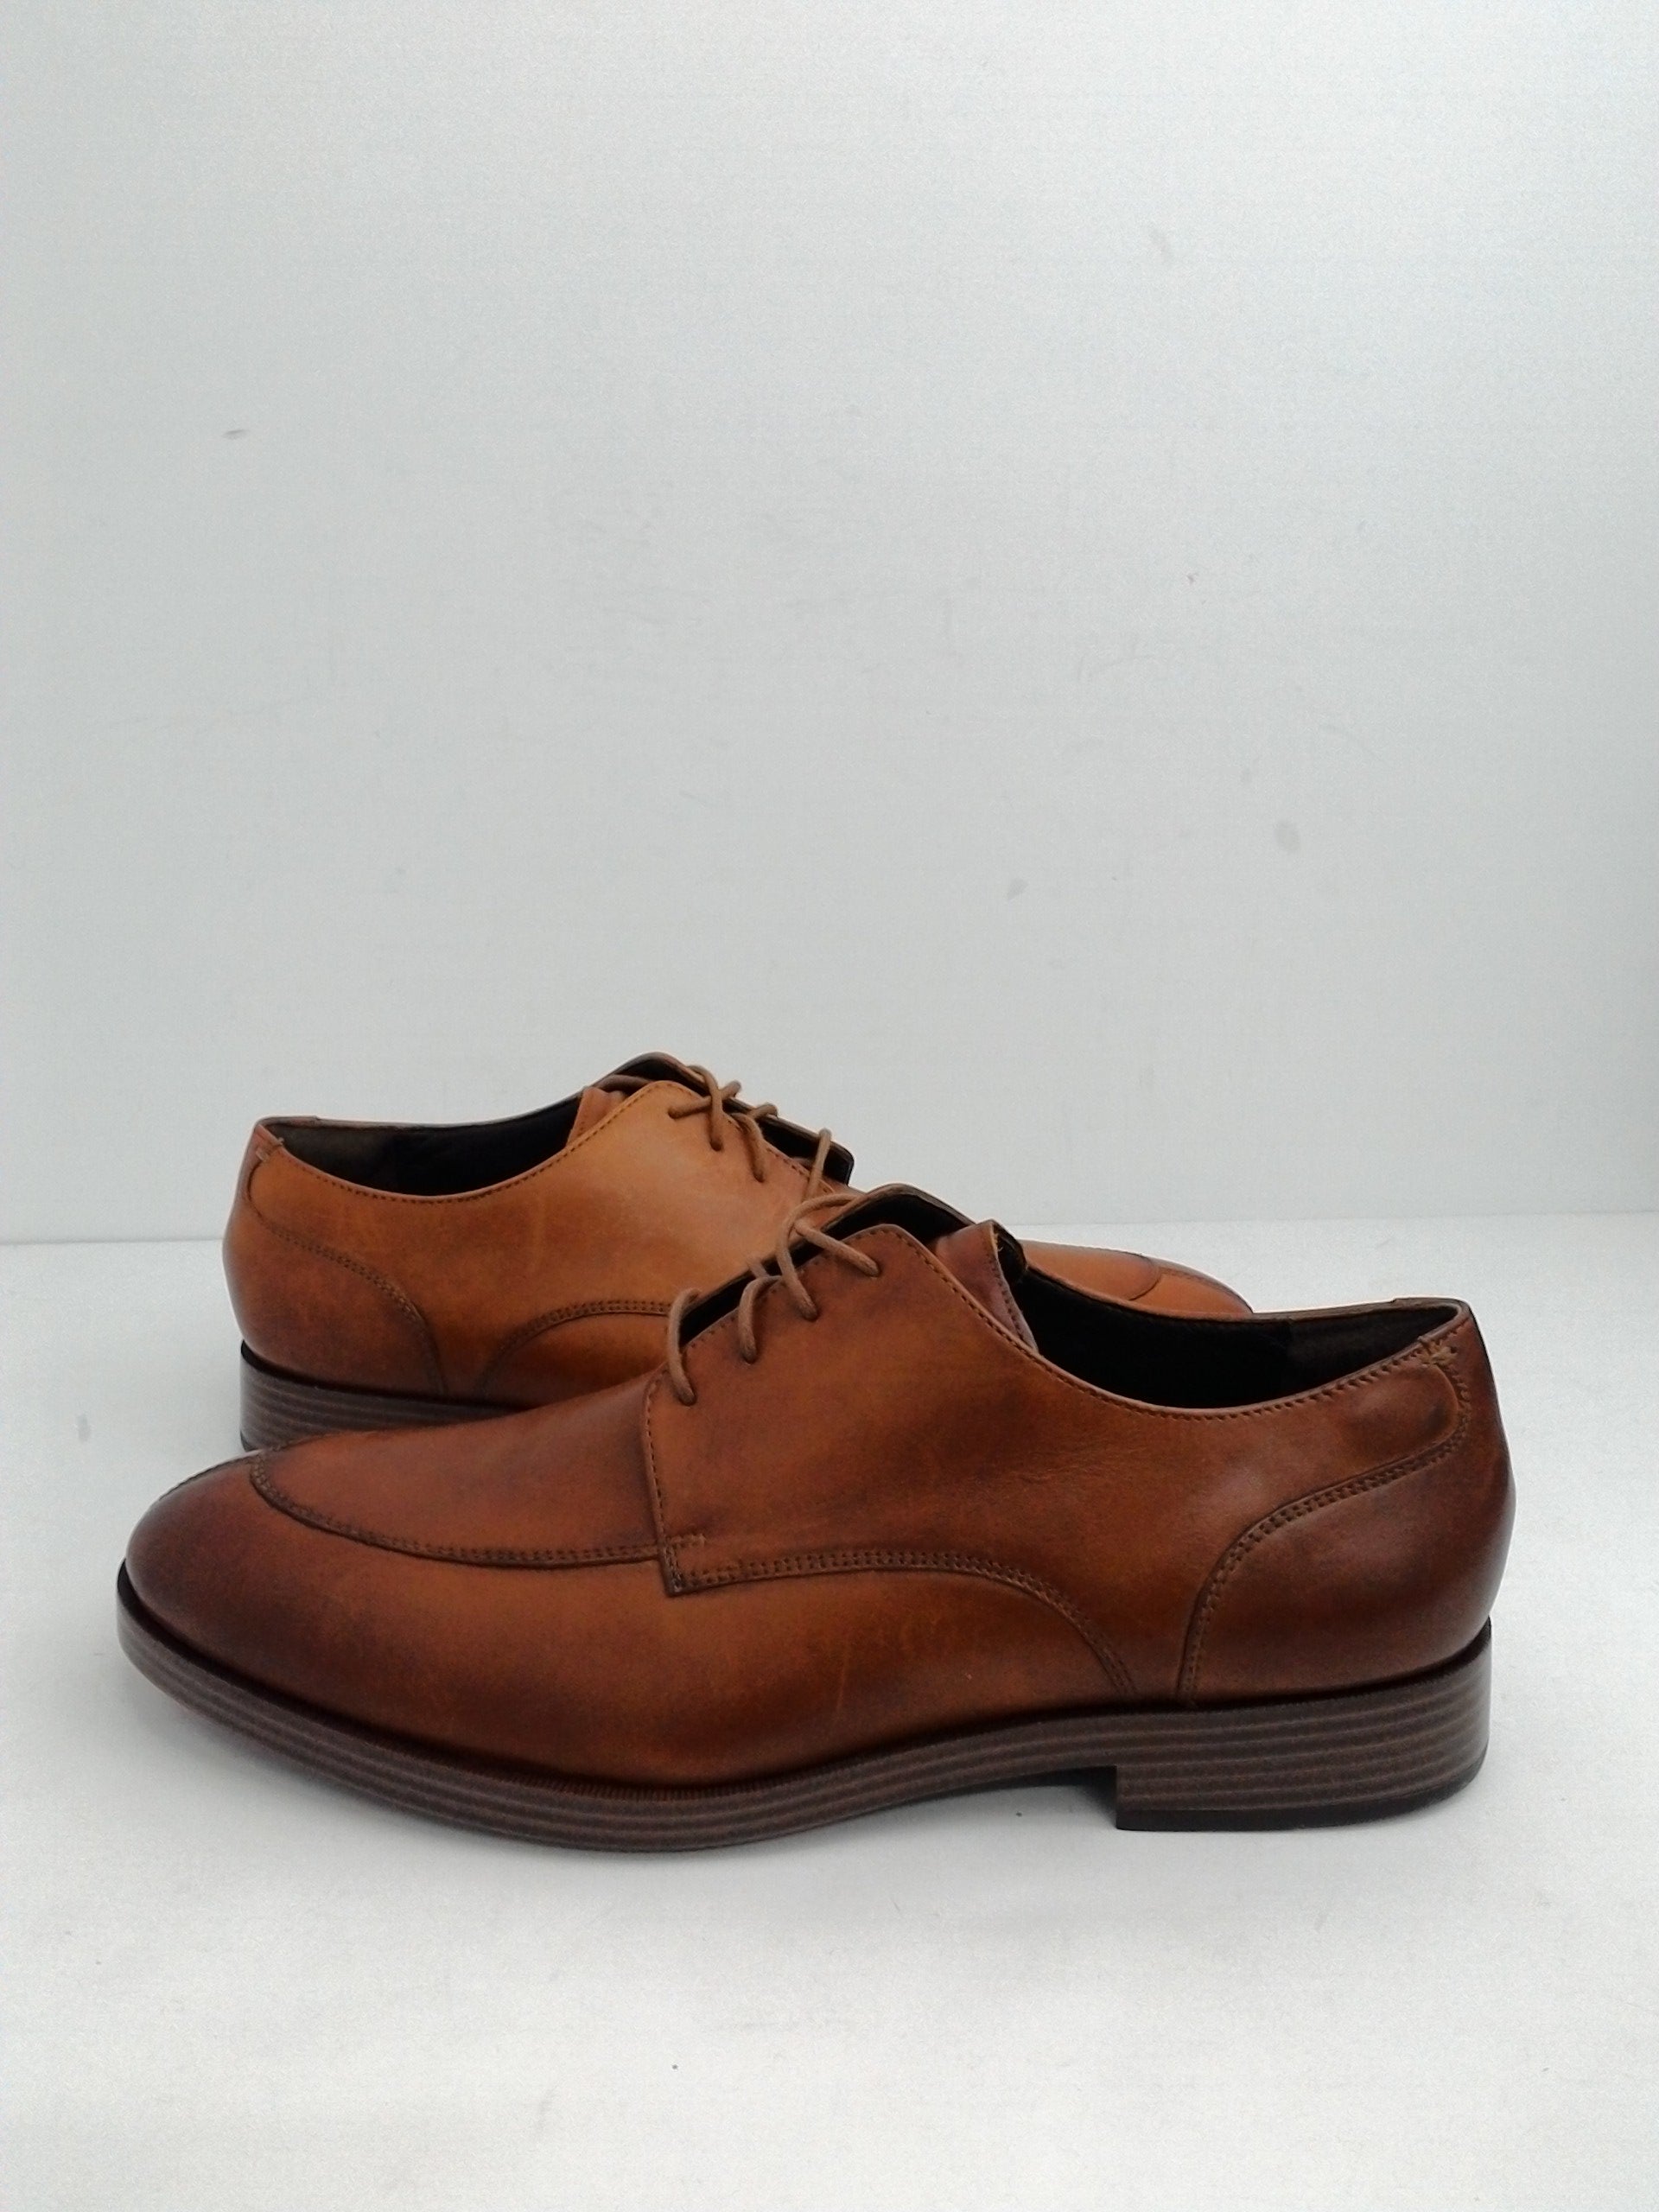 Cole Haan Men's Grand Oxford, Brown, Leather, Size 10 M - Prime Shoes ...